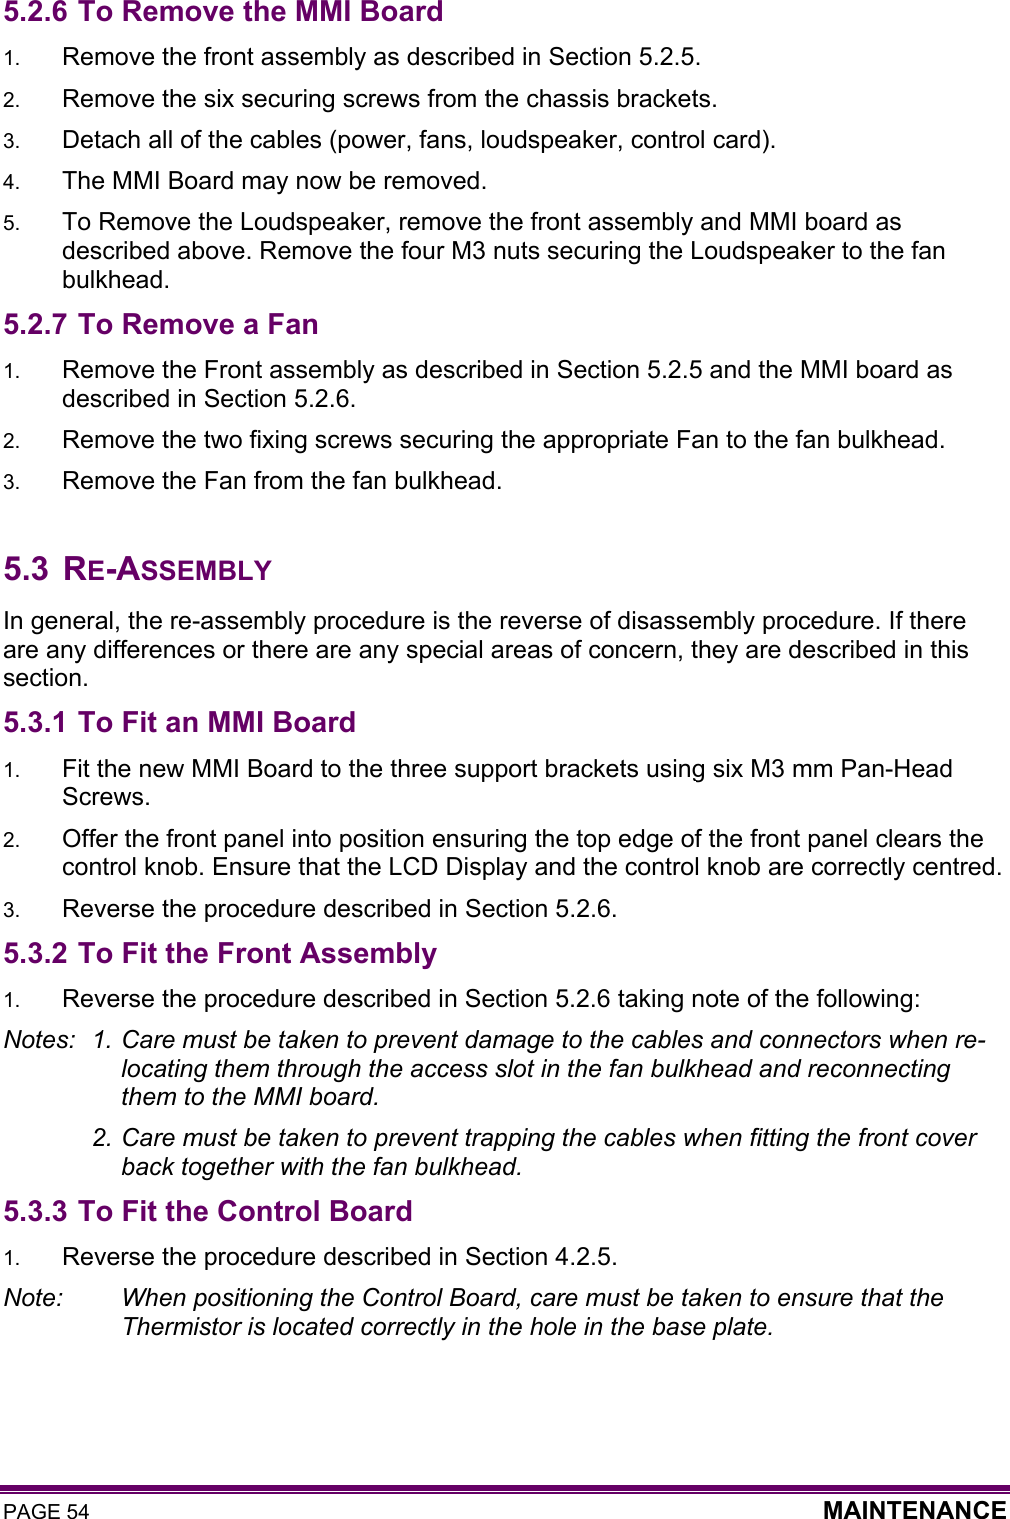 PAGE 54  MAINTENANCE  5.2.6 To Remove the MMI Board 1.  Remove the front assembly as described in Section 5.2.5. 2.  Remove the six securing screws from the chassis brackets. 3.  Detach all of the cables (power, fans, loudspeaker, control card). 4.  The MMI Board may now be removed.  5.  To Remove the Loudspeaker, remove the front assembly and MMI board as described above. Remove the four M3 nuts securing the Loudspeaker to the fan bulkhead.  5.2.7 To Remove a Fan 1.  Remove the Front assembly as described in Section 5.2.5 and the MMI board as described in Section 5.2.6. 2.  Remove the two fixing screws securing the appropriate Fan to the fan bulkhead. 3.  Remove the Fan from the fan bulkhead.  5.3 RE-ASSEMBLY In general, the re-assembly procedure is the reverse of disassembly procedure. If there are any differences or there are any special areas of concern, they are described in this section. 5.3.1 To Fit an MMI Board 1.  Fit the new MMI Board to the three support brackets using six M3 mm Pan-Head Screws. 2.  Offer the front panel into position ensuring the top edge of the front panel clears the control knob. Ensure that the LCD Display and the control knob are correctly centred. 3.  Reverse the procedure described in Section 5.2.6. 5.3.2 To Fit the Front Assembly 1.  Reverse the procedure described in Section 5.2.6 taking note of the following: Notes:  1. Care must be taken to prevent damage to the cables and connectors when re-locating them through the access slot in the fan bulkhead and reconnecting them to the MMI board.   2. Care must be taken to prevent trapping the cables when fitting the front cover back together with the fan bulkhead. 5.3.3 To Fit the Control Board 1.  Reverse the procedure described in Section 4.2.5.  Note:    When positioning the Control Board, care must be taken to ensure that the Thermistor is located correctly in the hole in the base plate.   